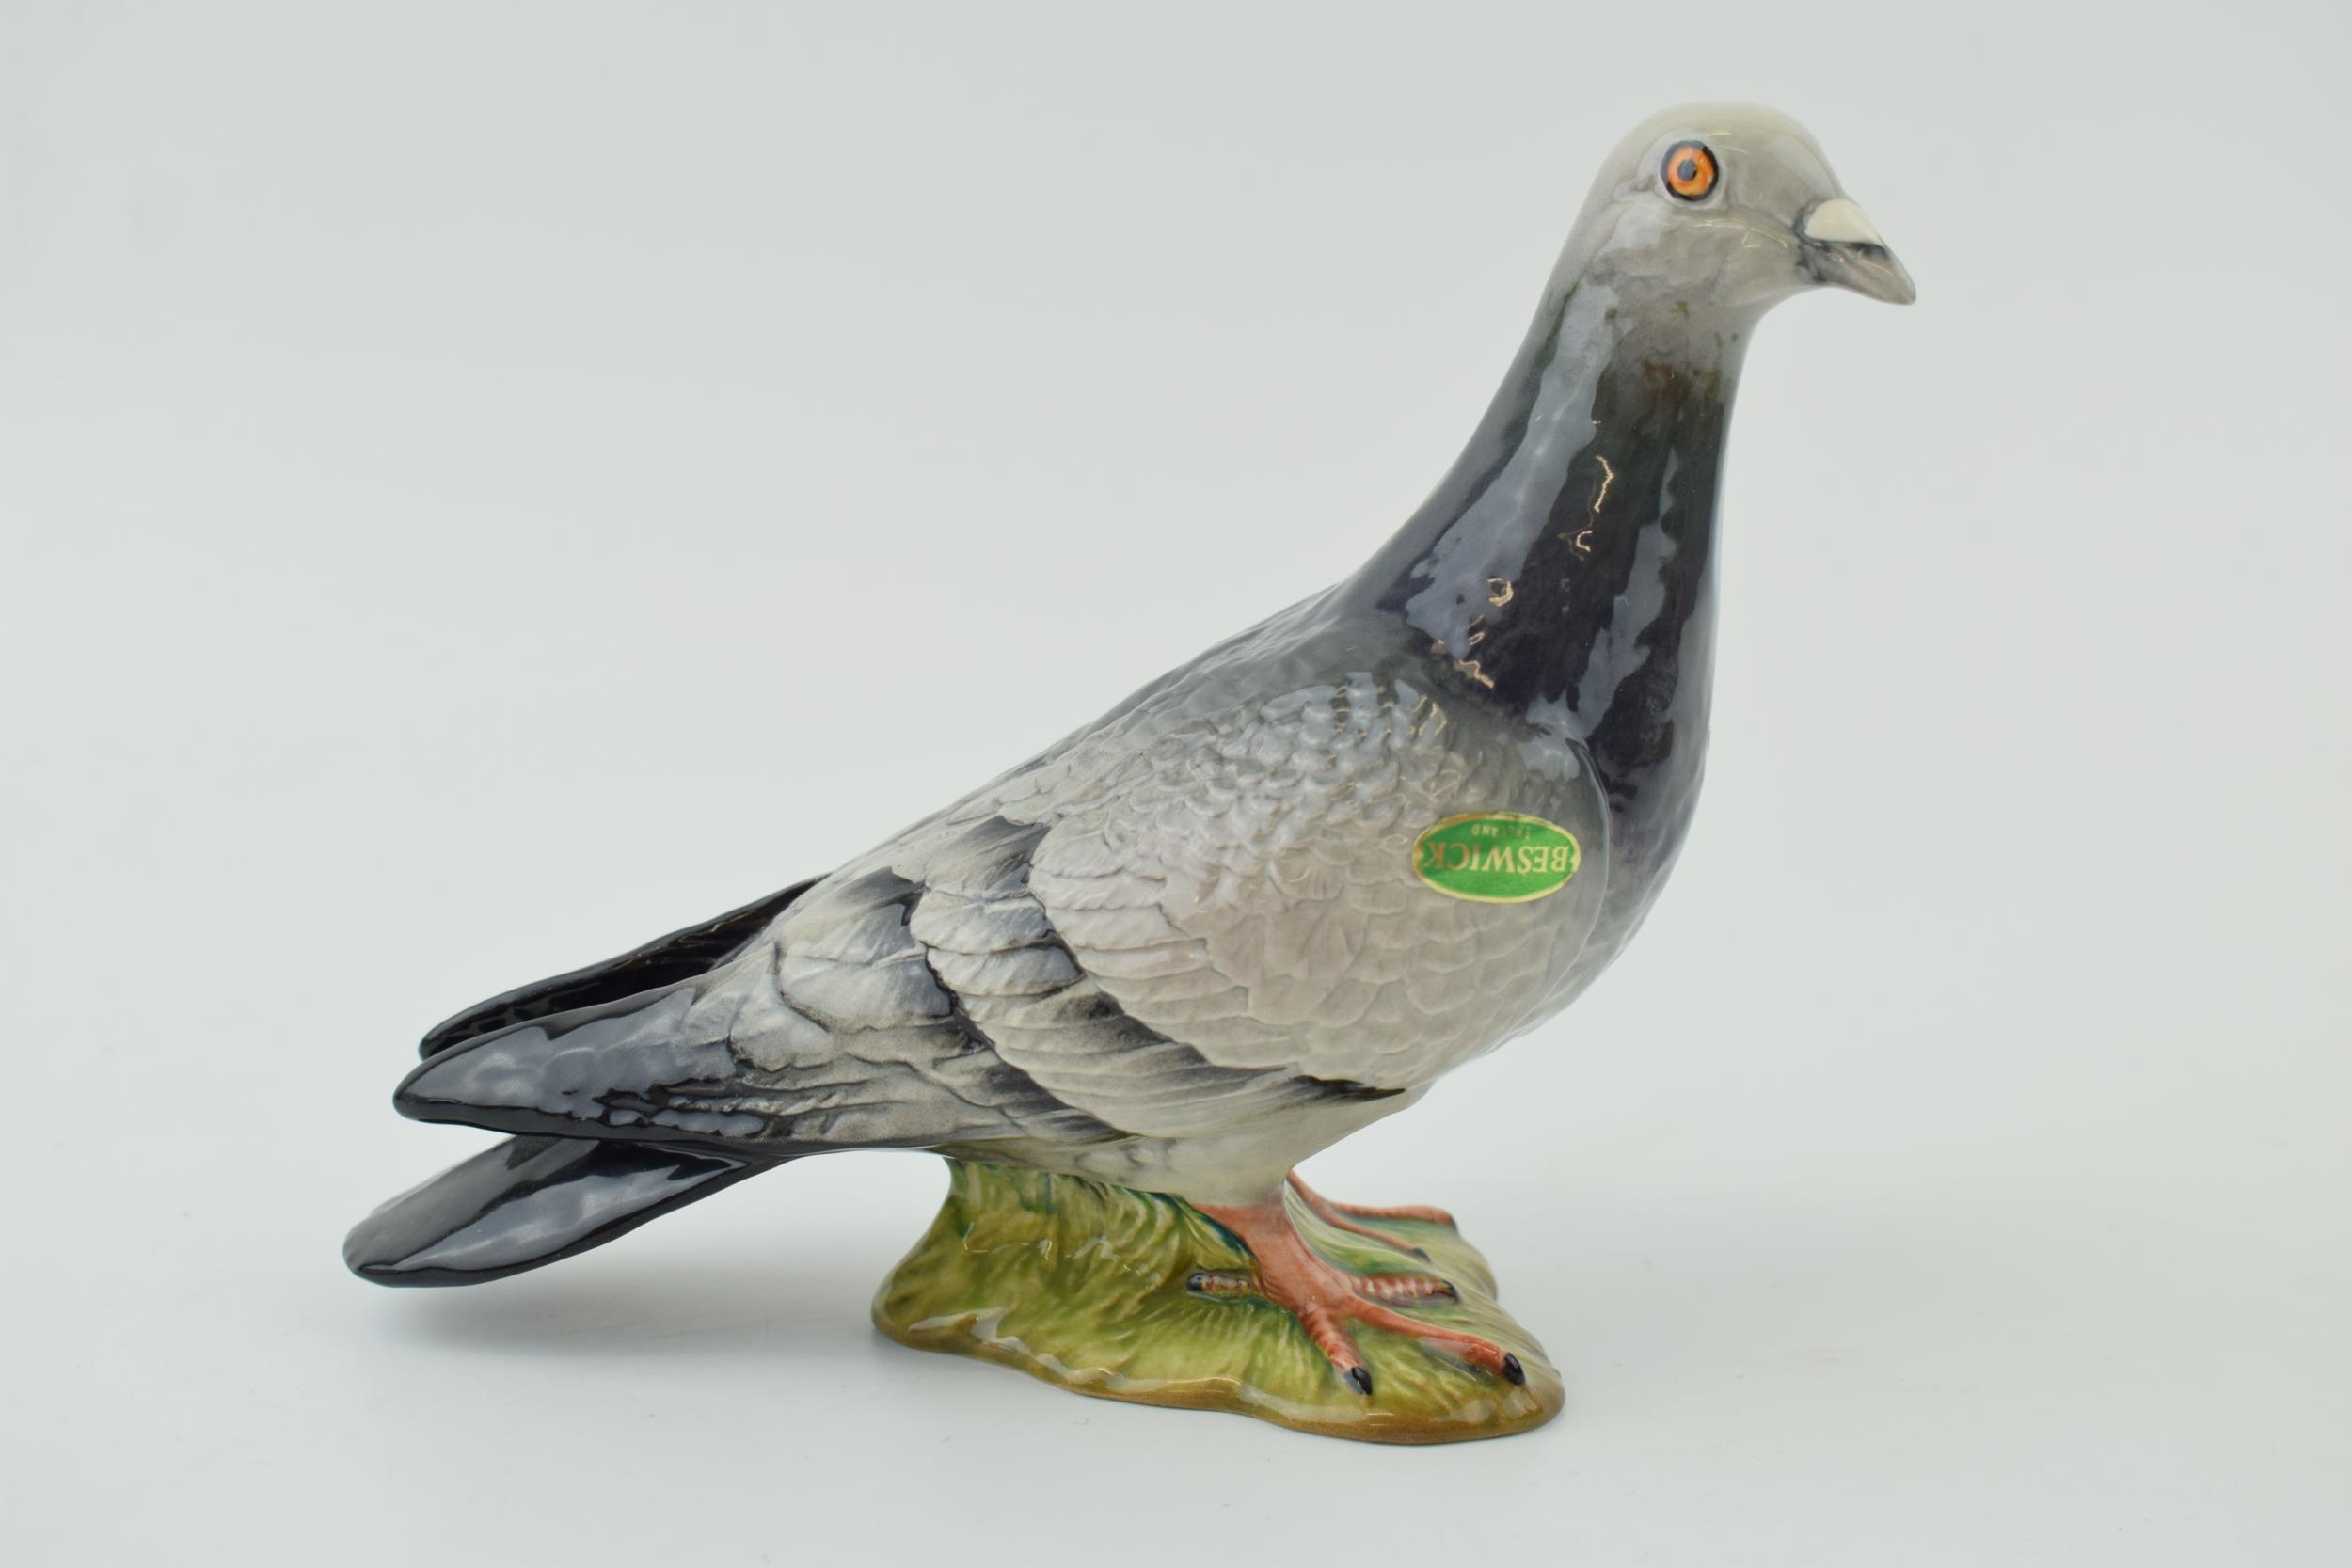 Beswick Grey Pigeon 1383. In good condition with no obvious damage or restoration.